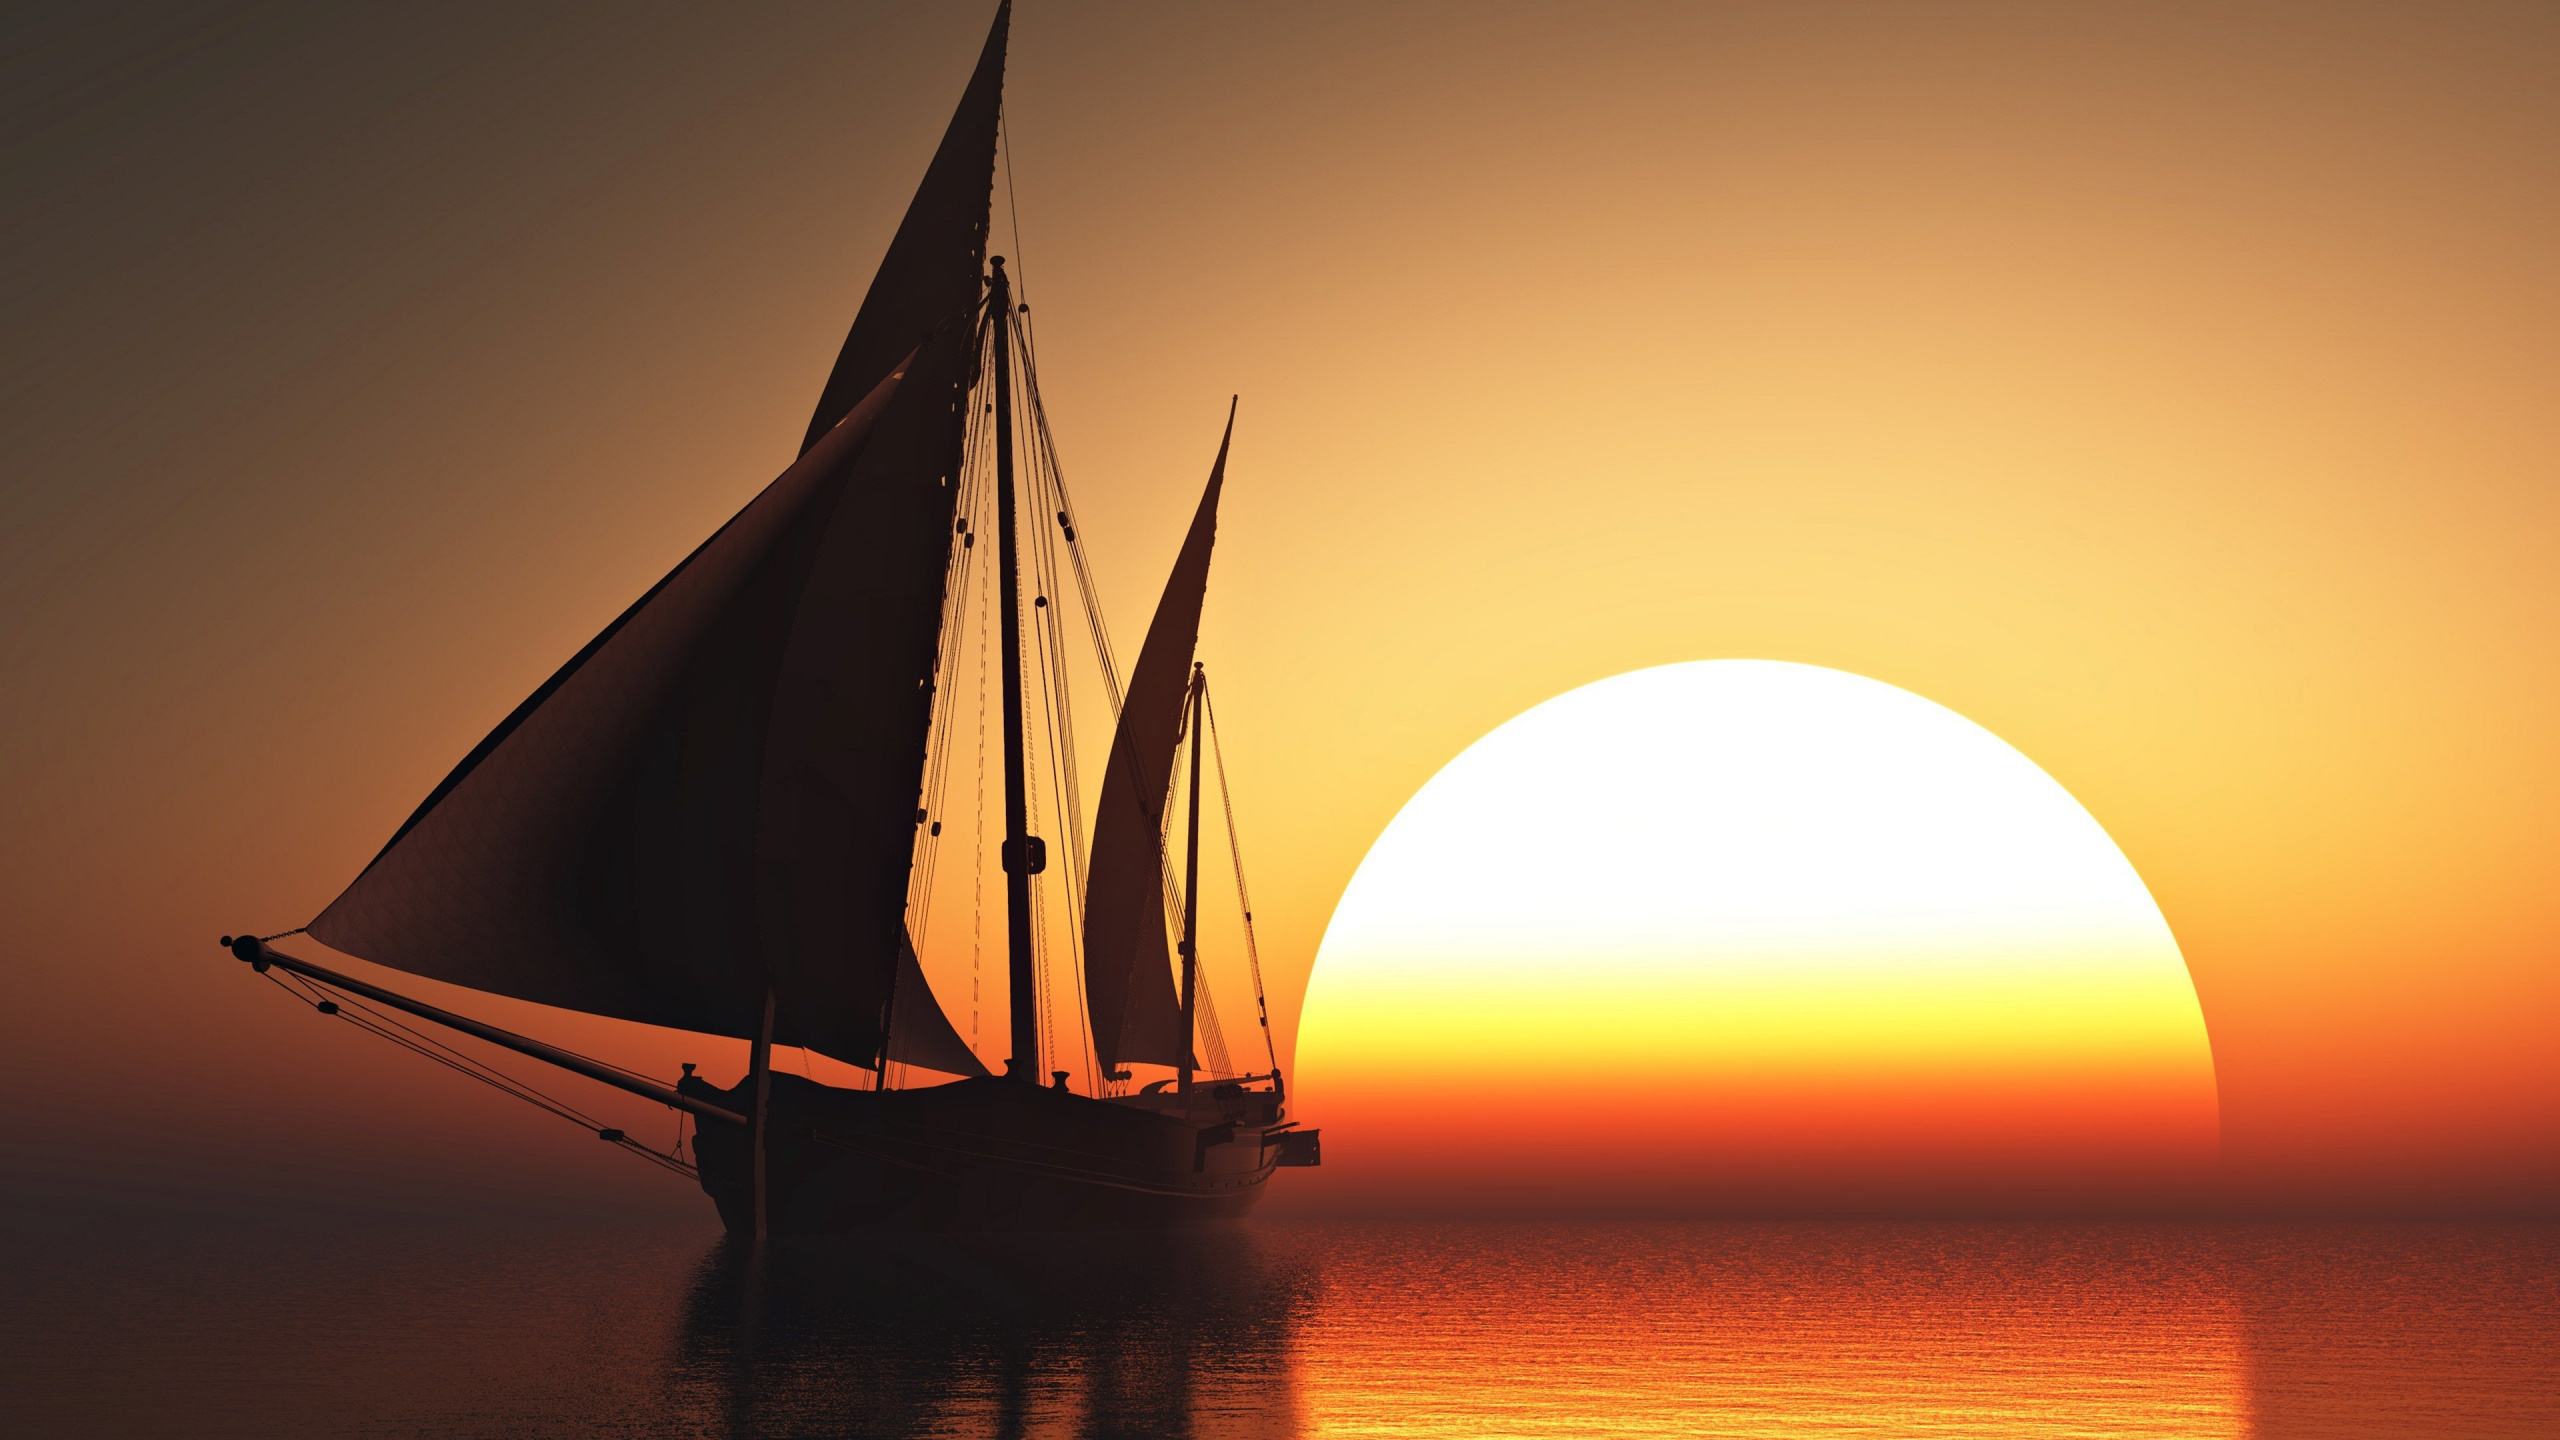 Silhouette of Sailboat on Sea During Sunset. Wallpaper in 2560x1440 Resolution